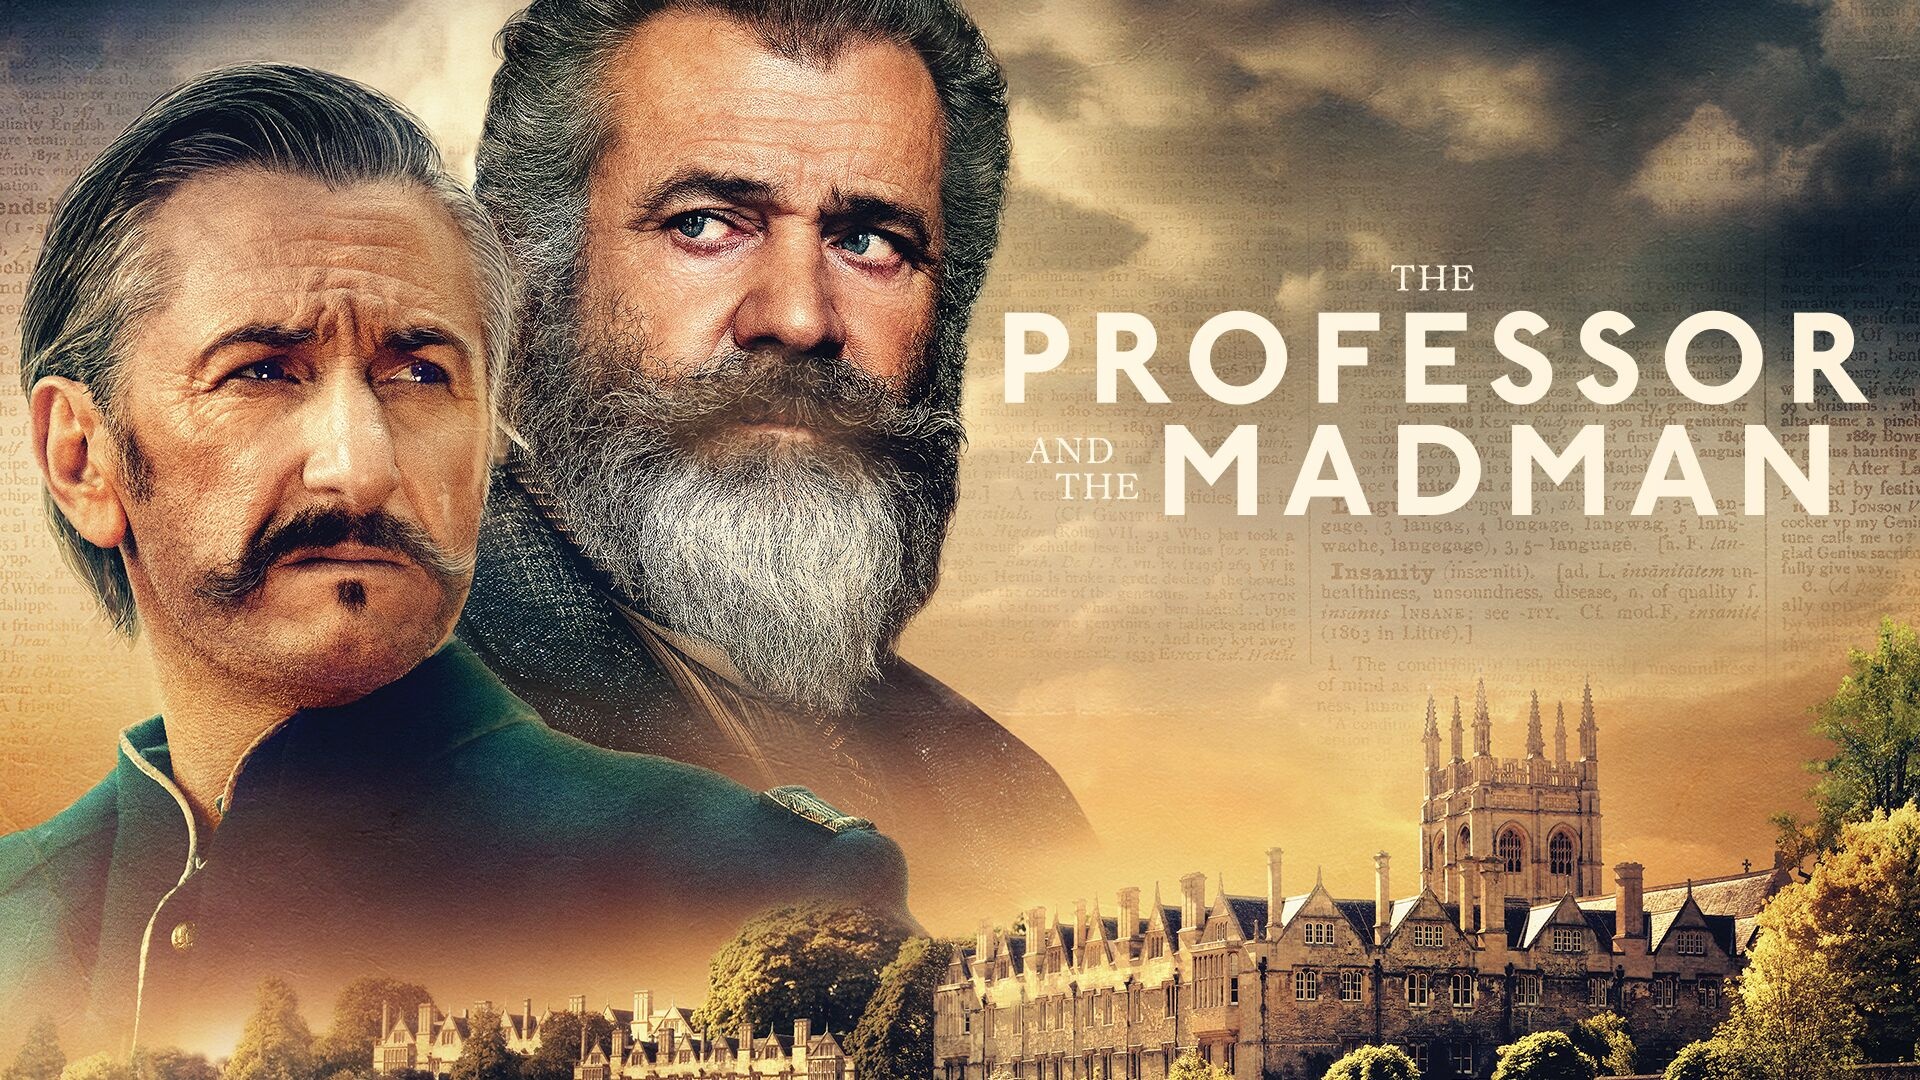 The Professor and the Madman (2019) Wallpapers (23+ images inside)